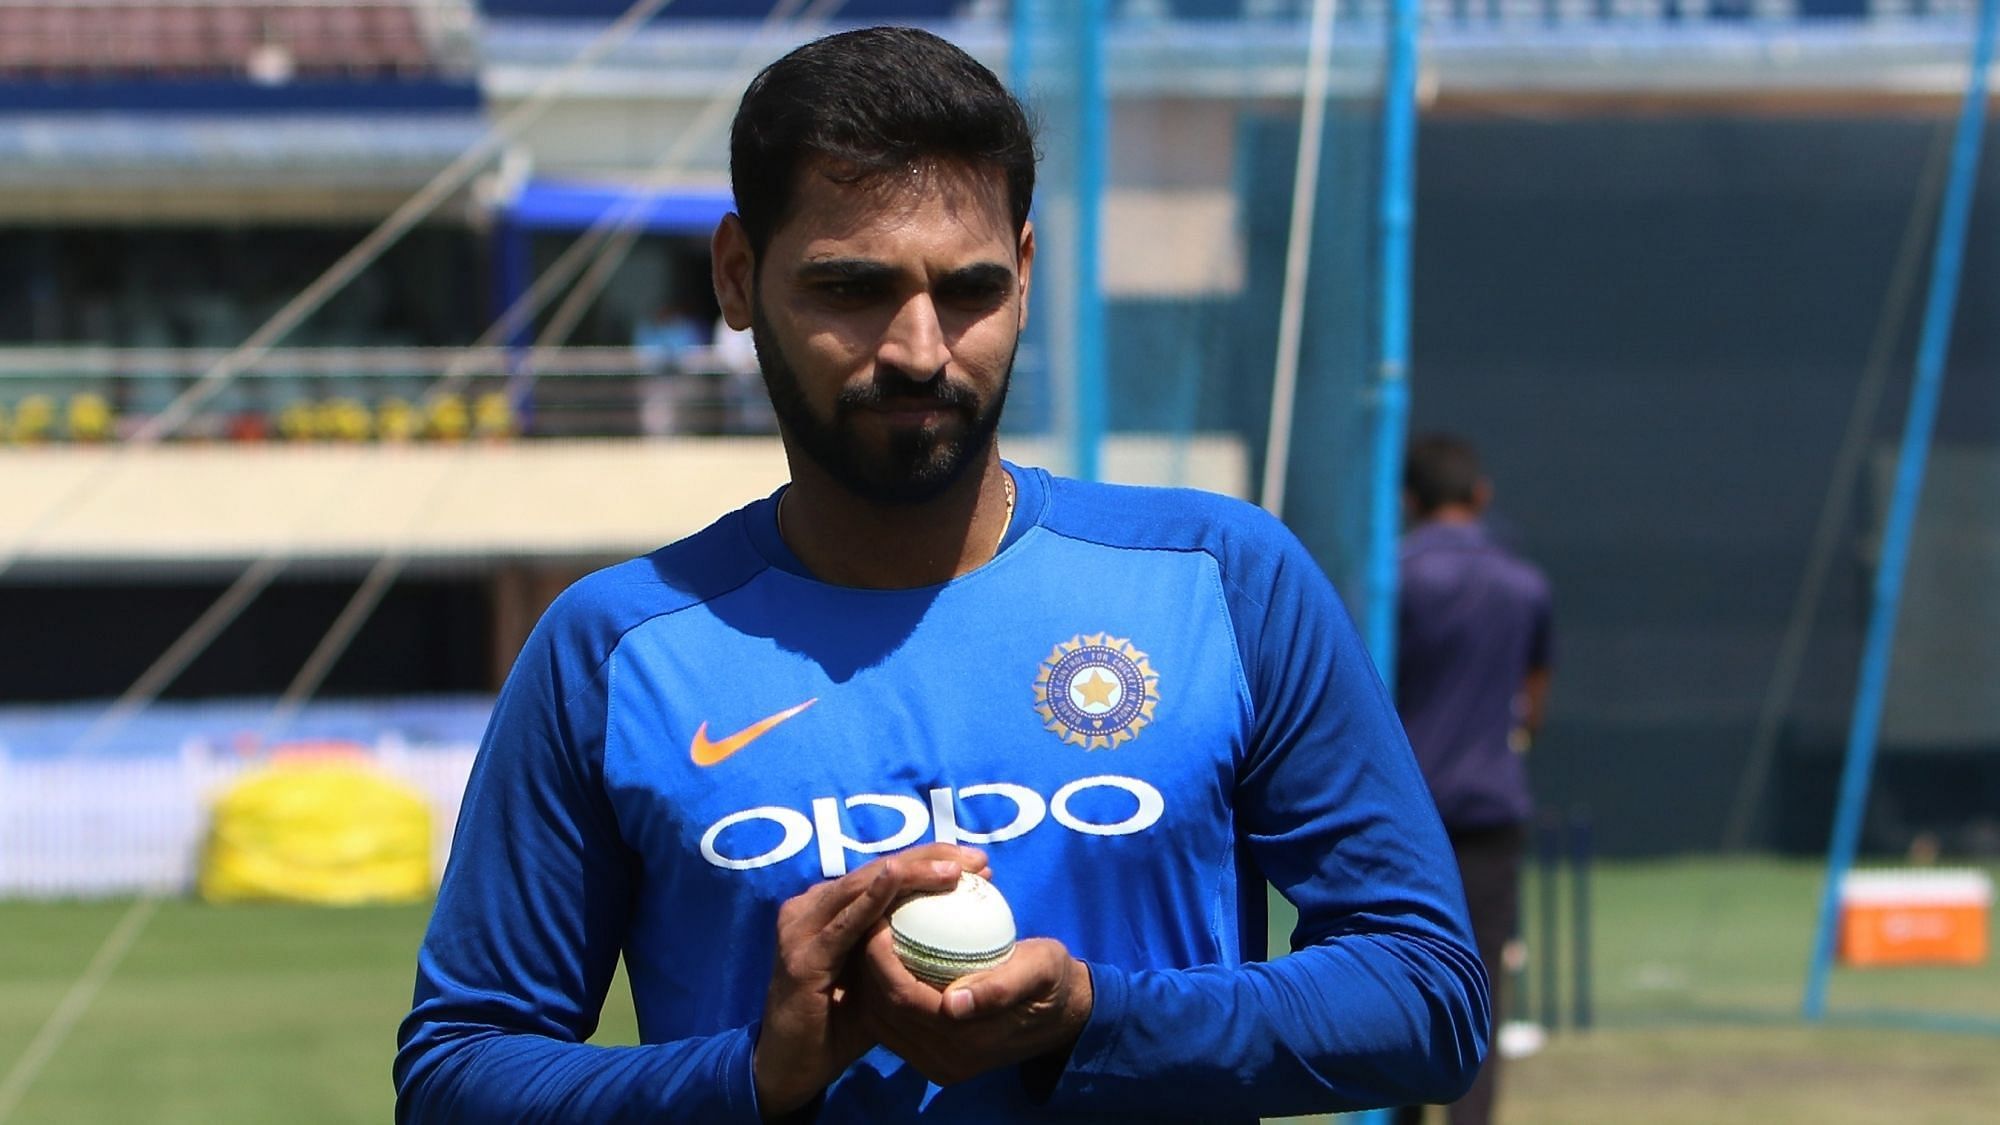 Bhuvneshwar Kumar says he does not have any pressure in the IPL 2020